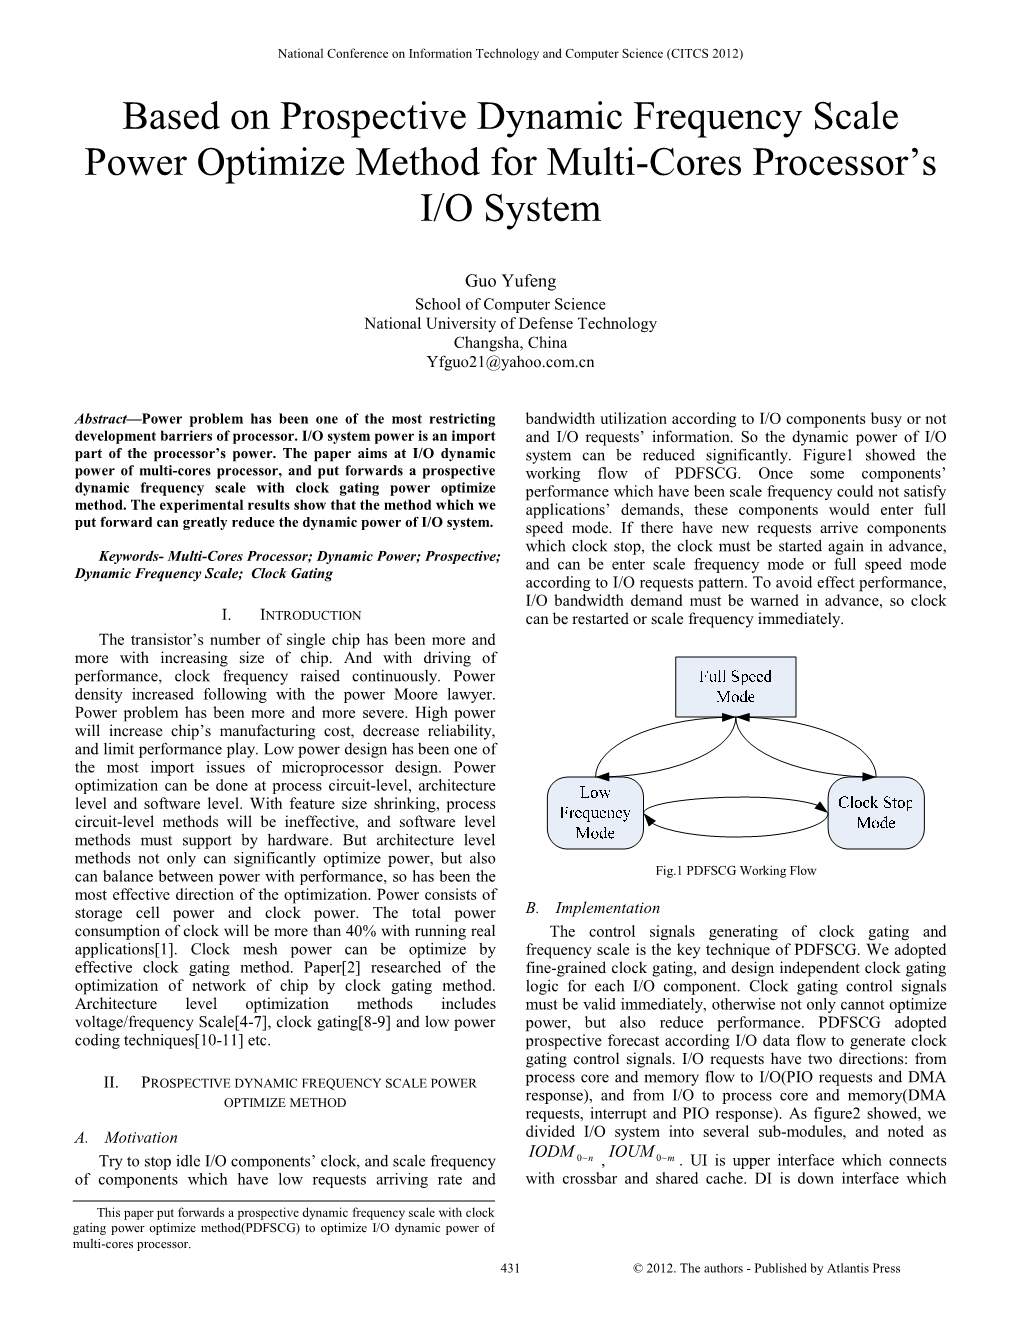 Based on Prospective Dynamic Frequency Scale Power Optimize Method for Multi-Cores Processor’S I/O System